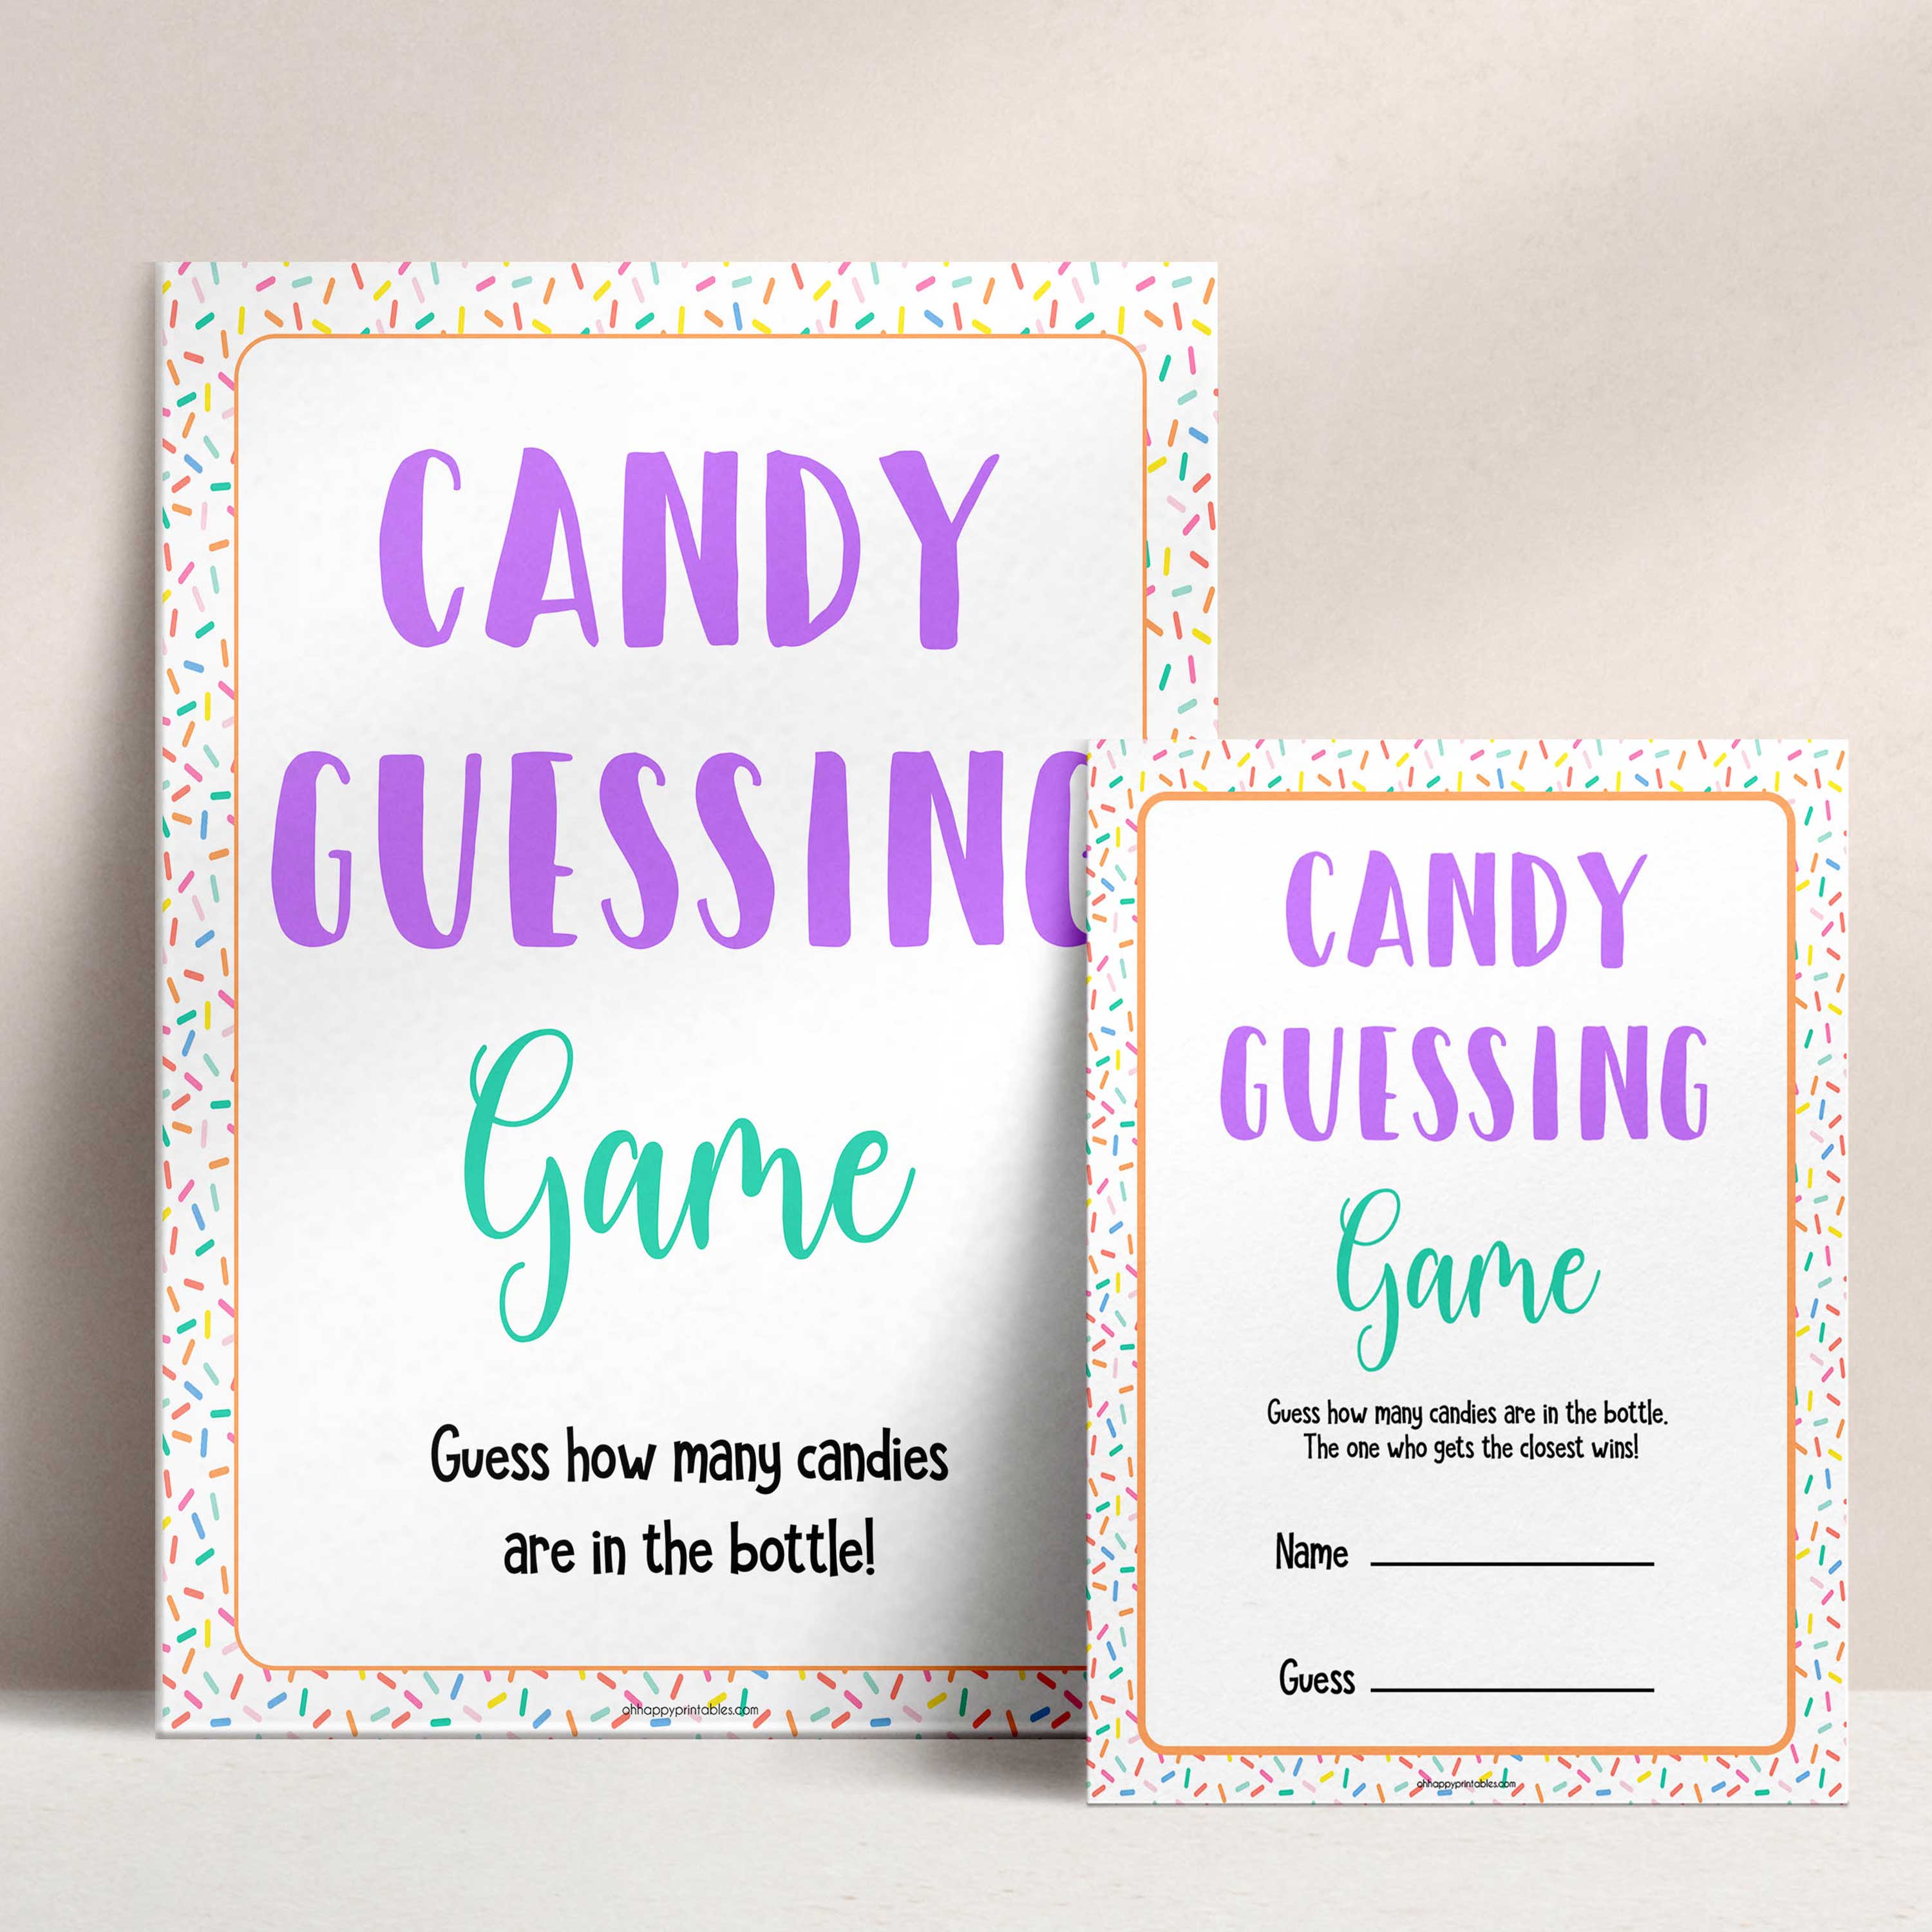 Sprinkle Baby Shower Games, Printable PDF - My Party Design